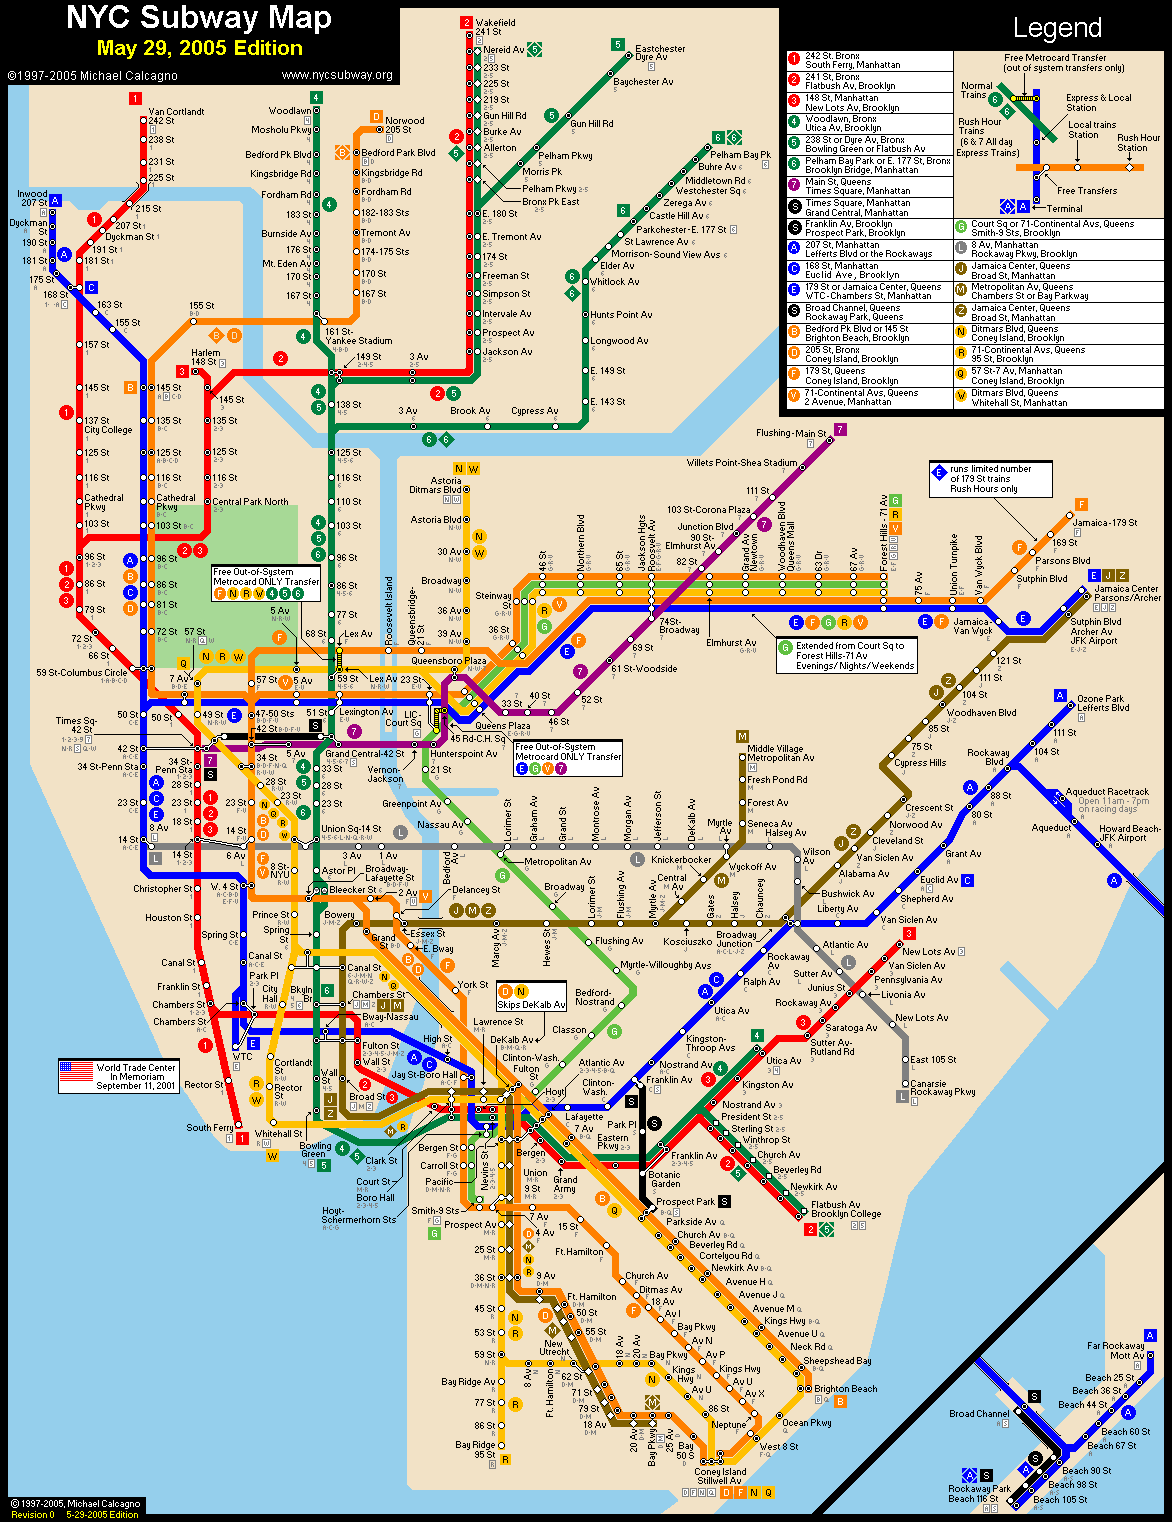 Subway map of New York City with the names of subway lines